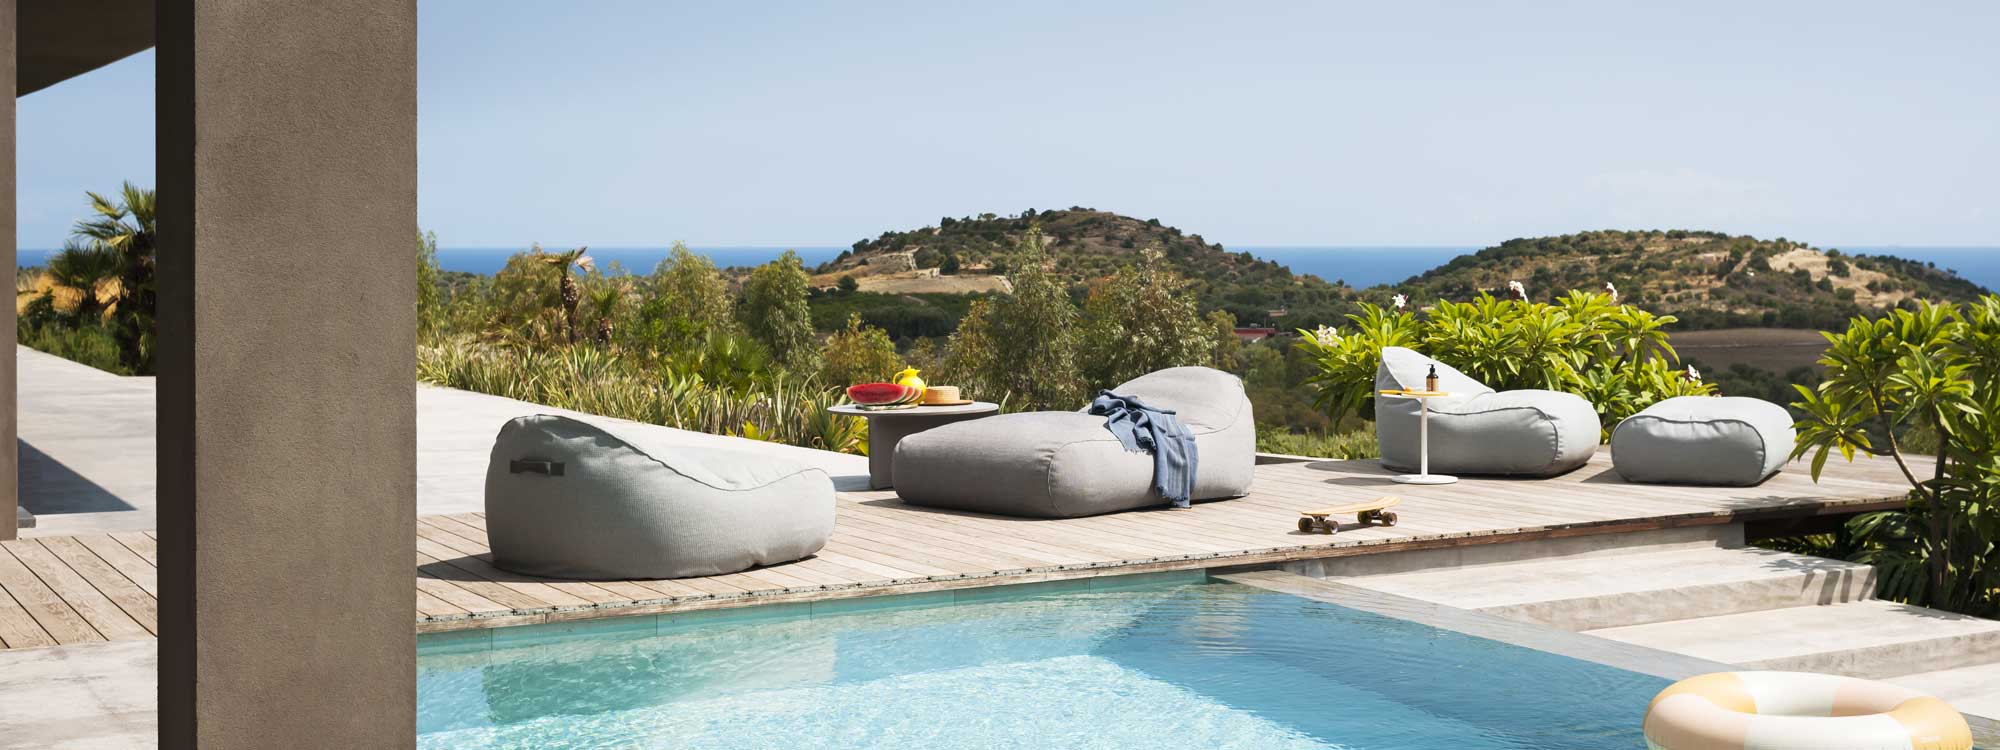 Image of RODA Onda outdoor lounge beanbag and chaise longue bean bag with Apsic low table, shown on sunny poolside decking with undulating Italian countryside in the background